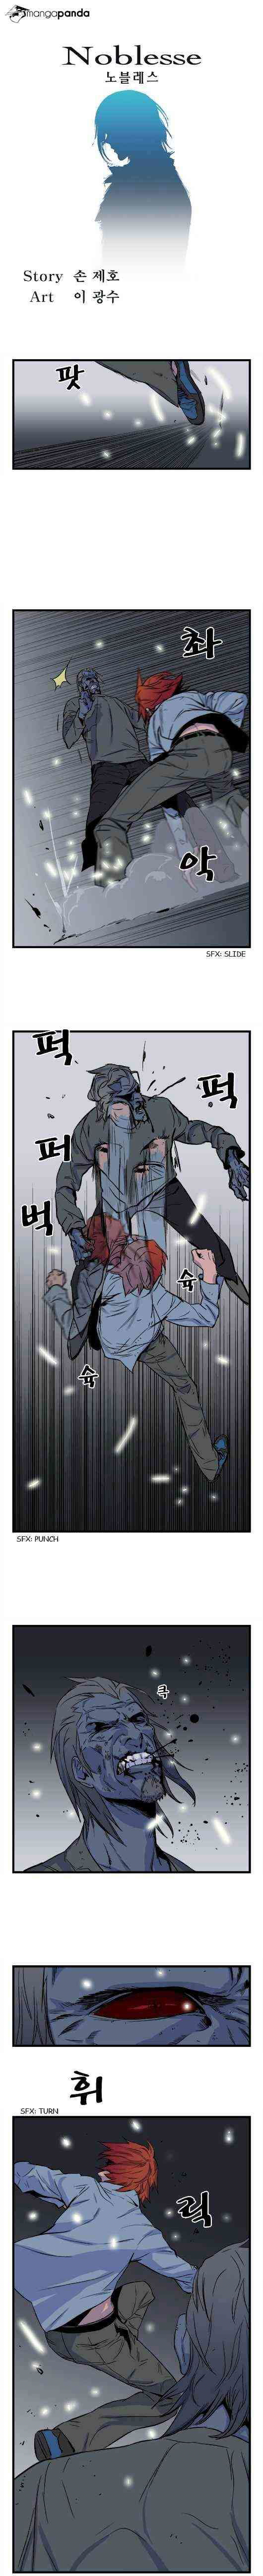 Noblesse Chapter 30 page 1